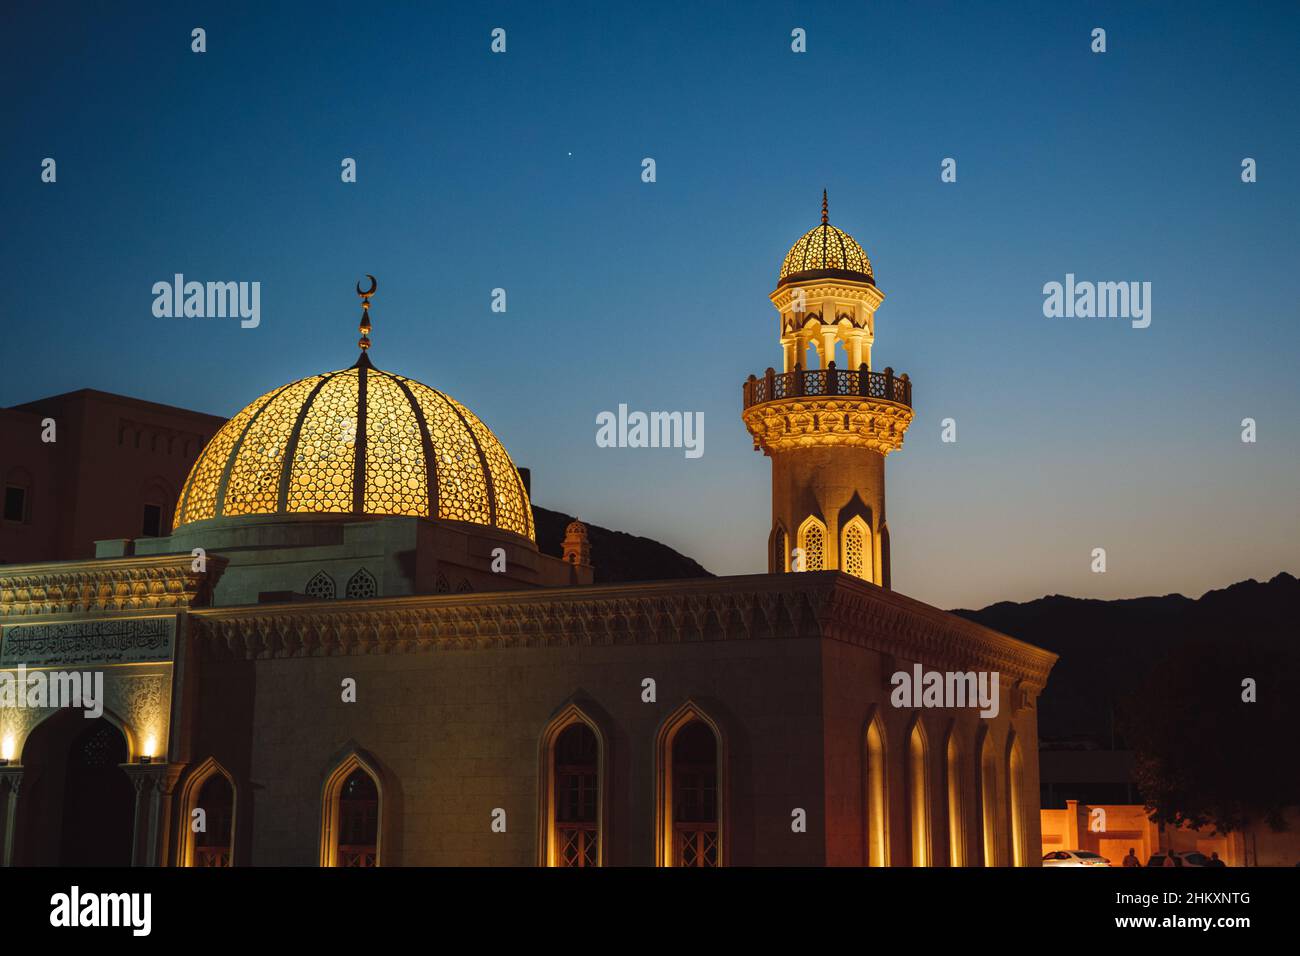 A mosque in Oman Muscat surrounded by mountains Stock Photo